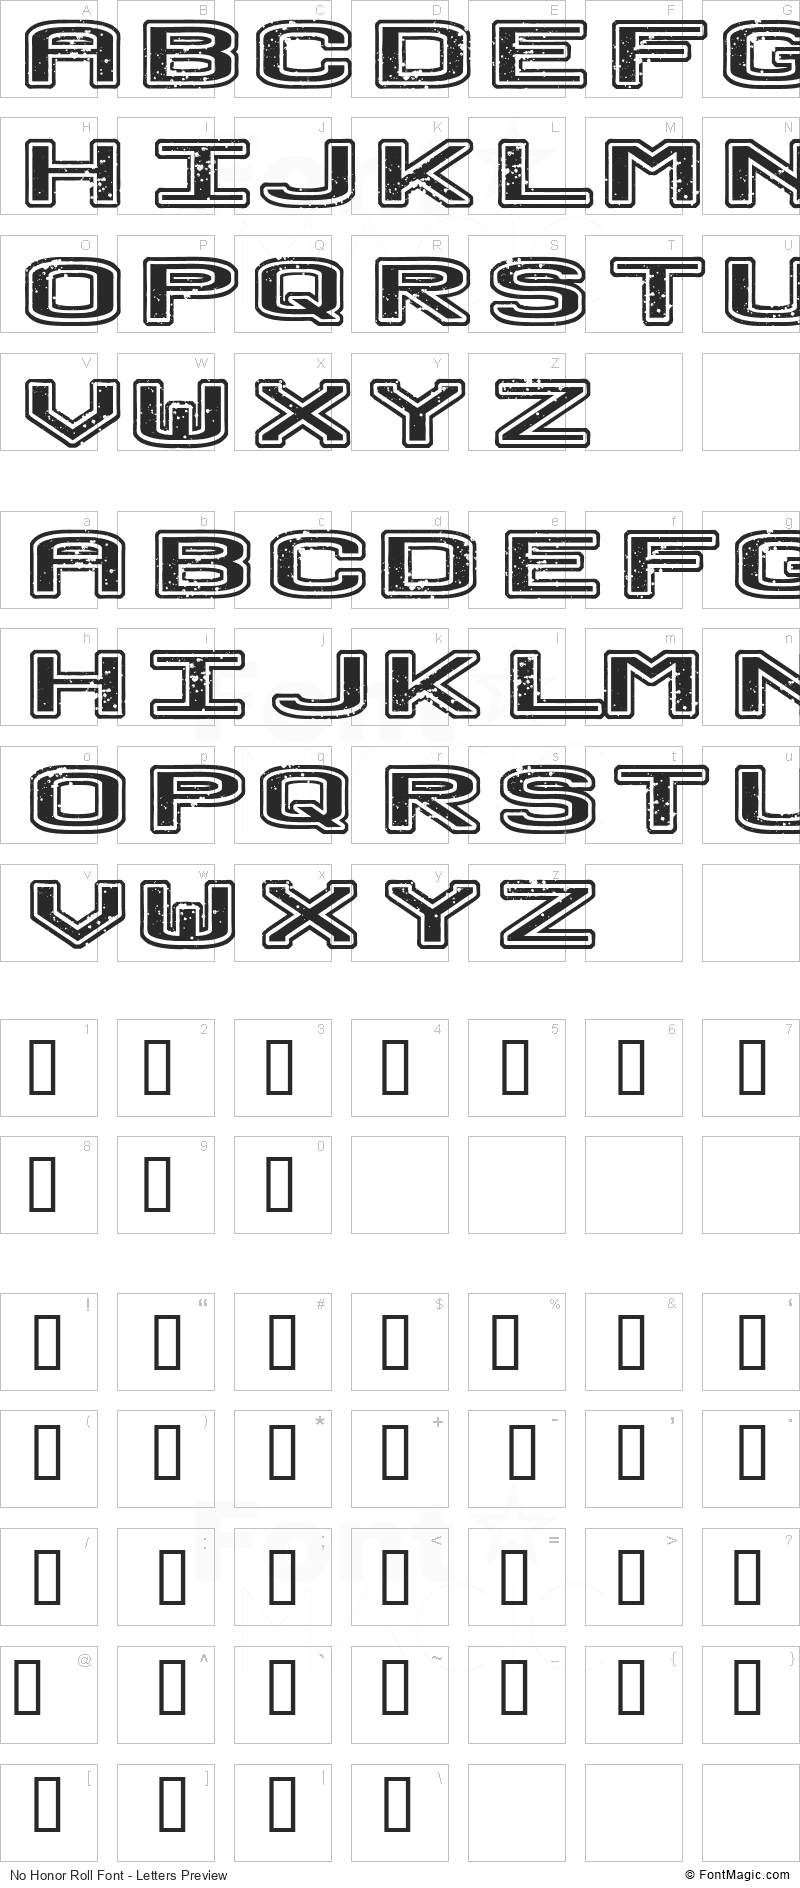 No Honor Roll Font - All Latters Preview Chart